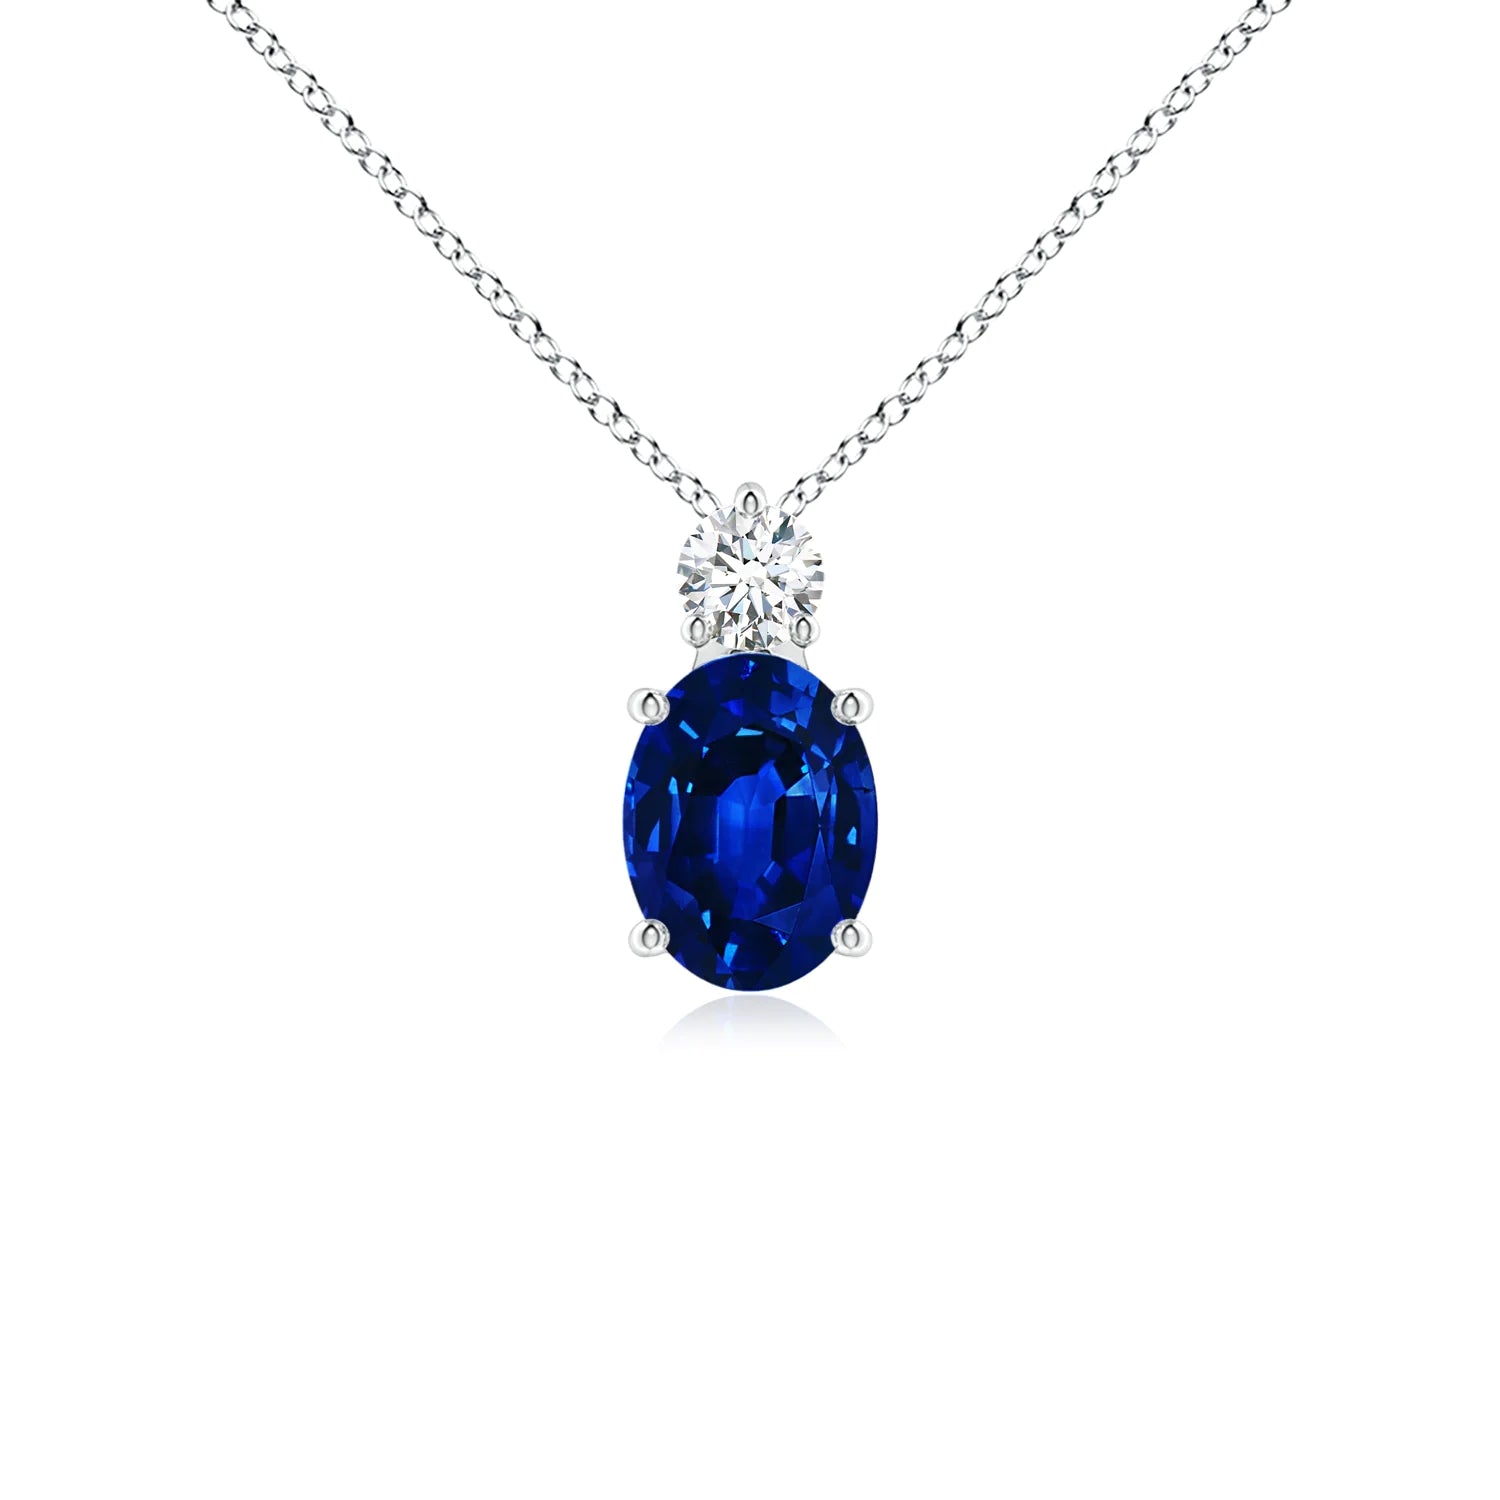 1.7 CT. Oval Blue Sapphire Solitaire Pendant with White Sapphire